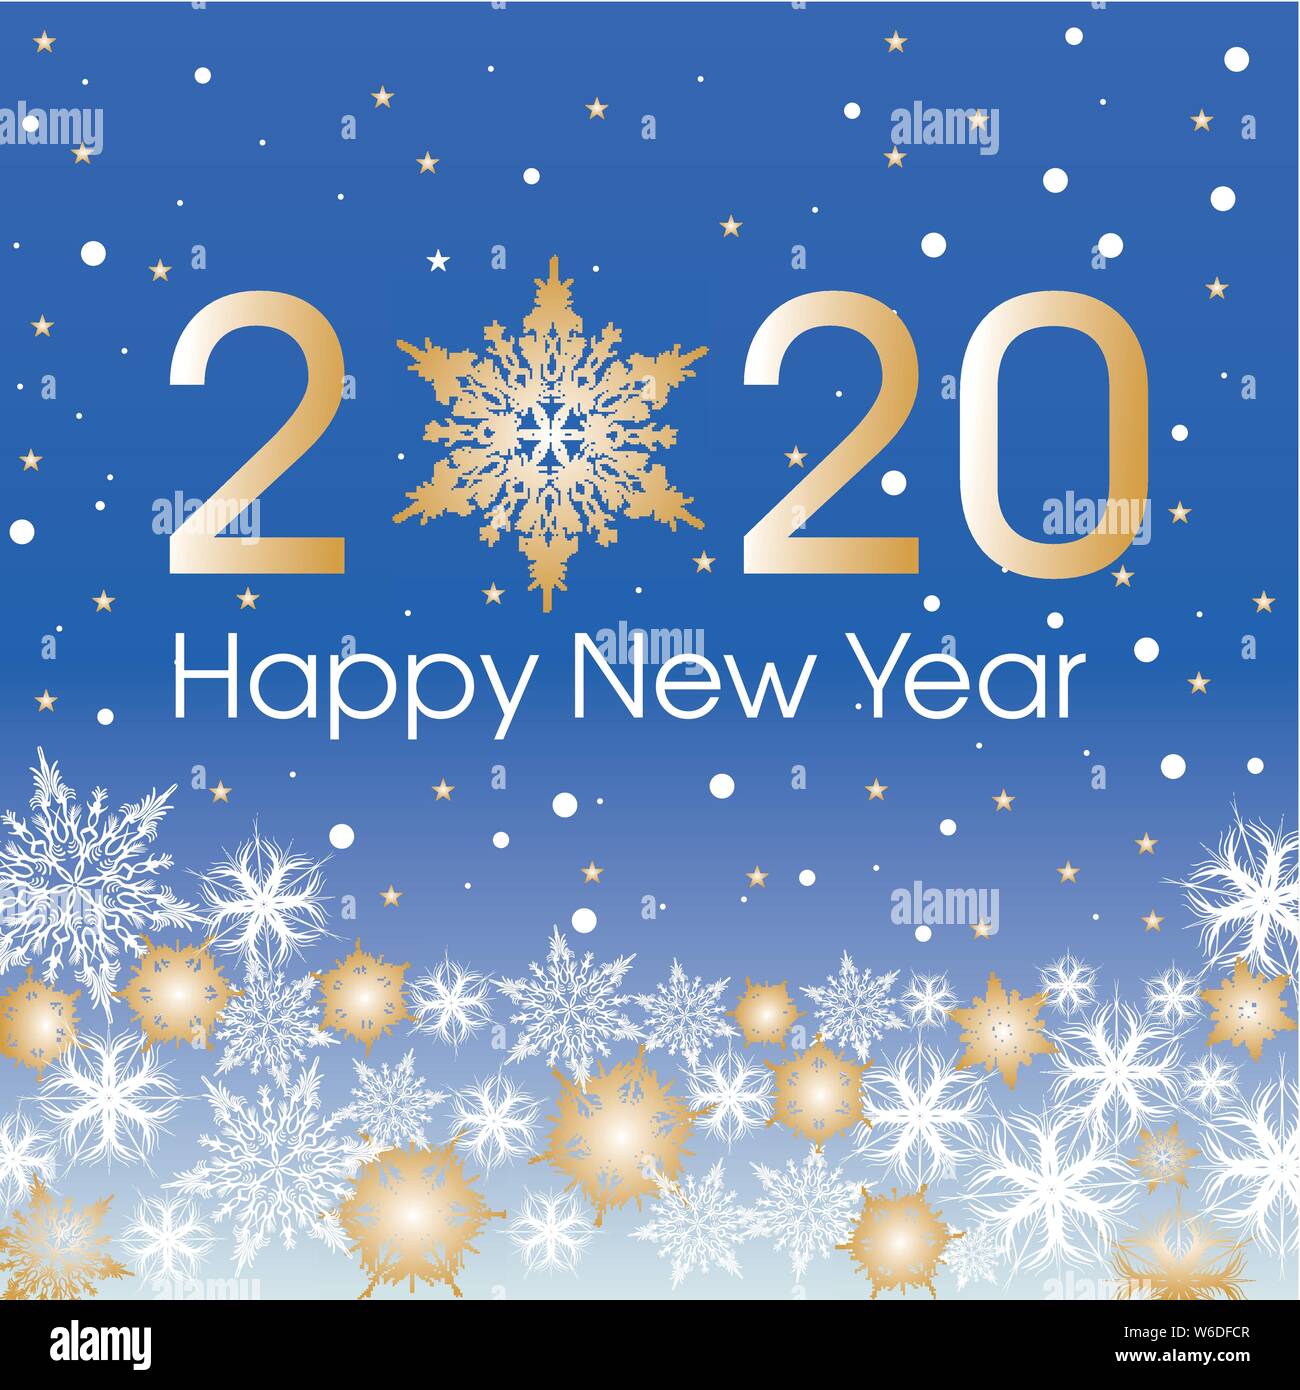 Happy New Year Template from c8.alamy.com